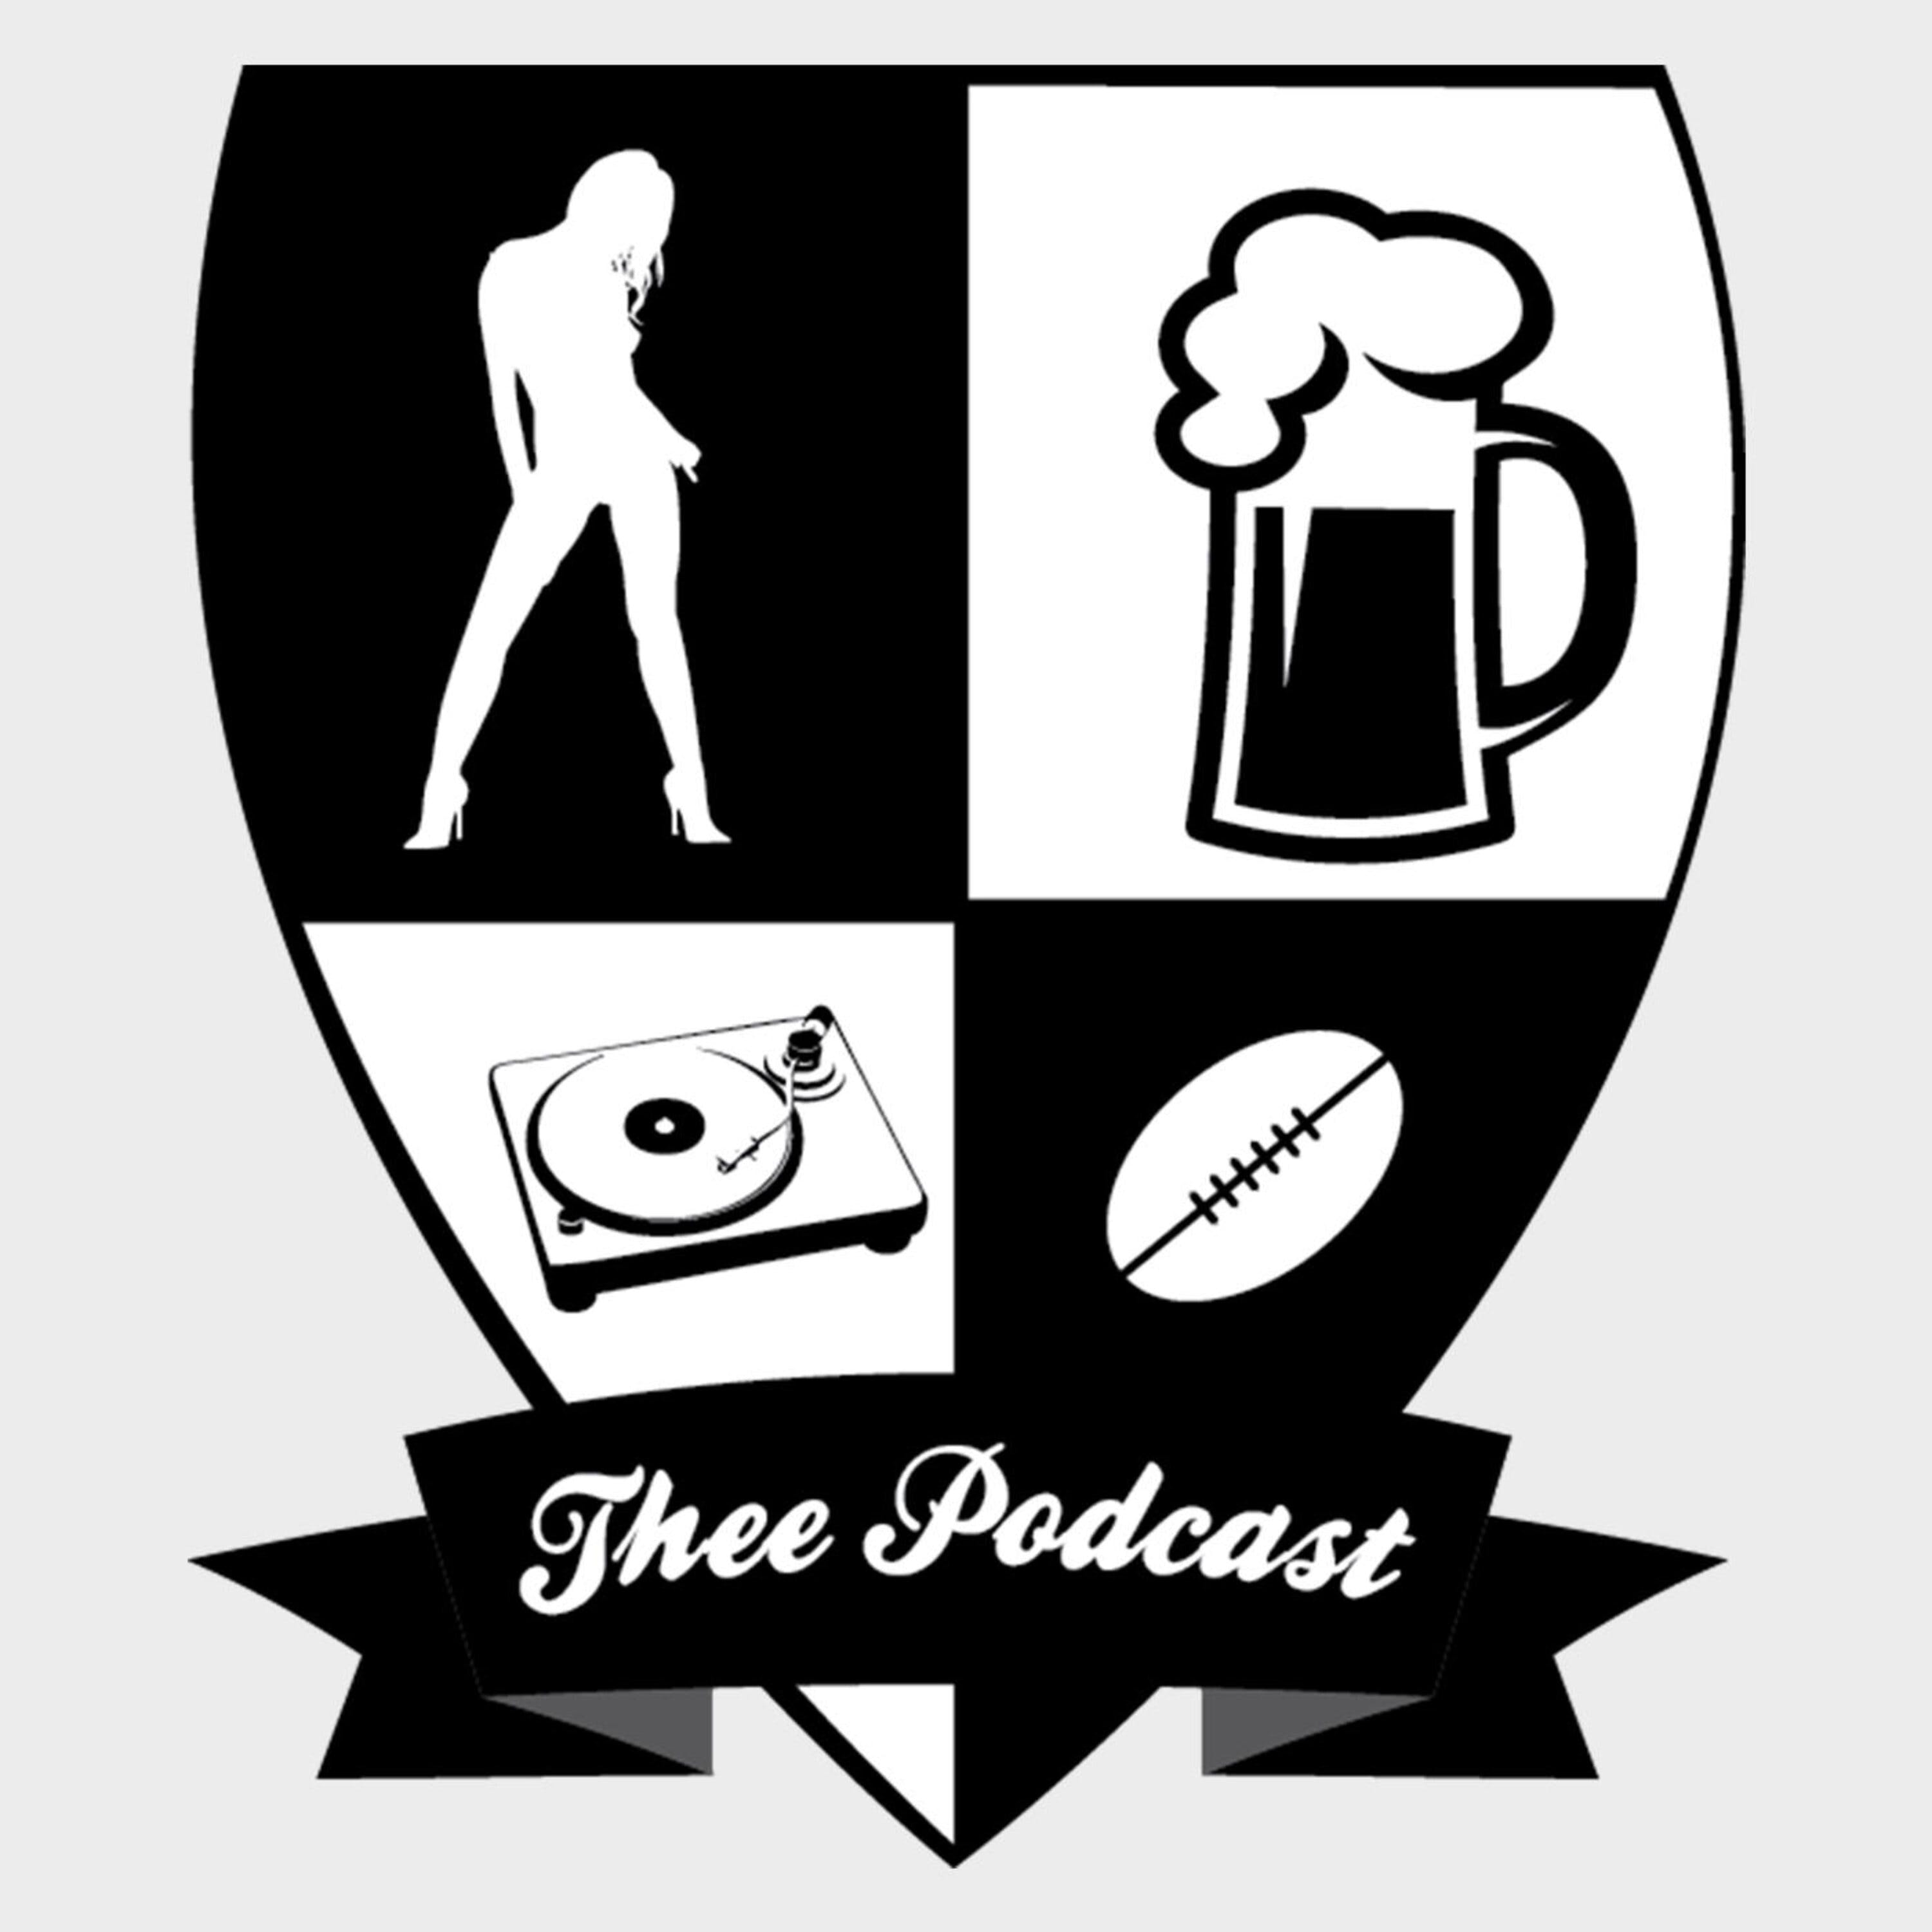 Thee Podcast Episode 368